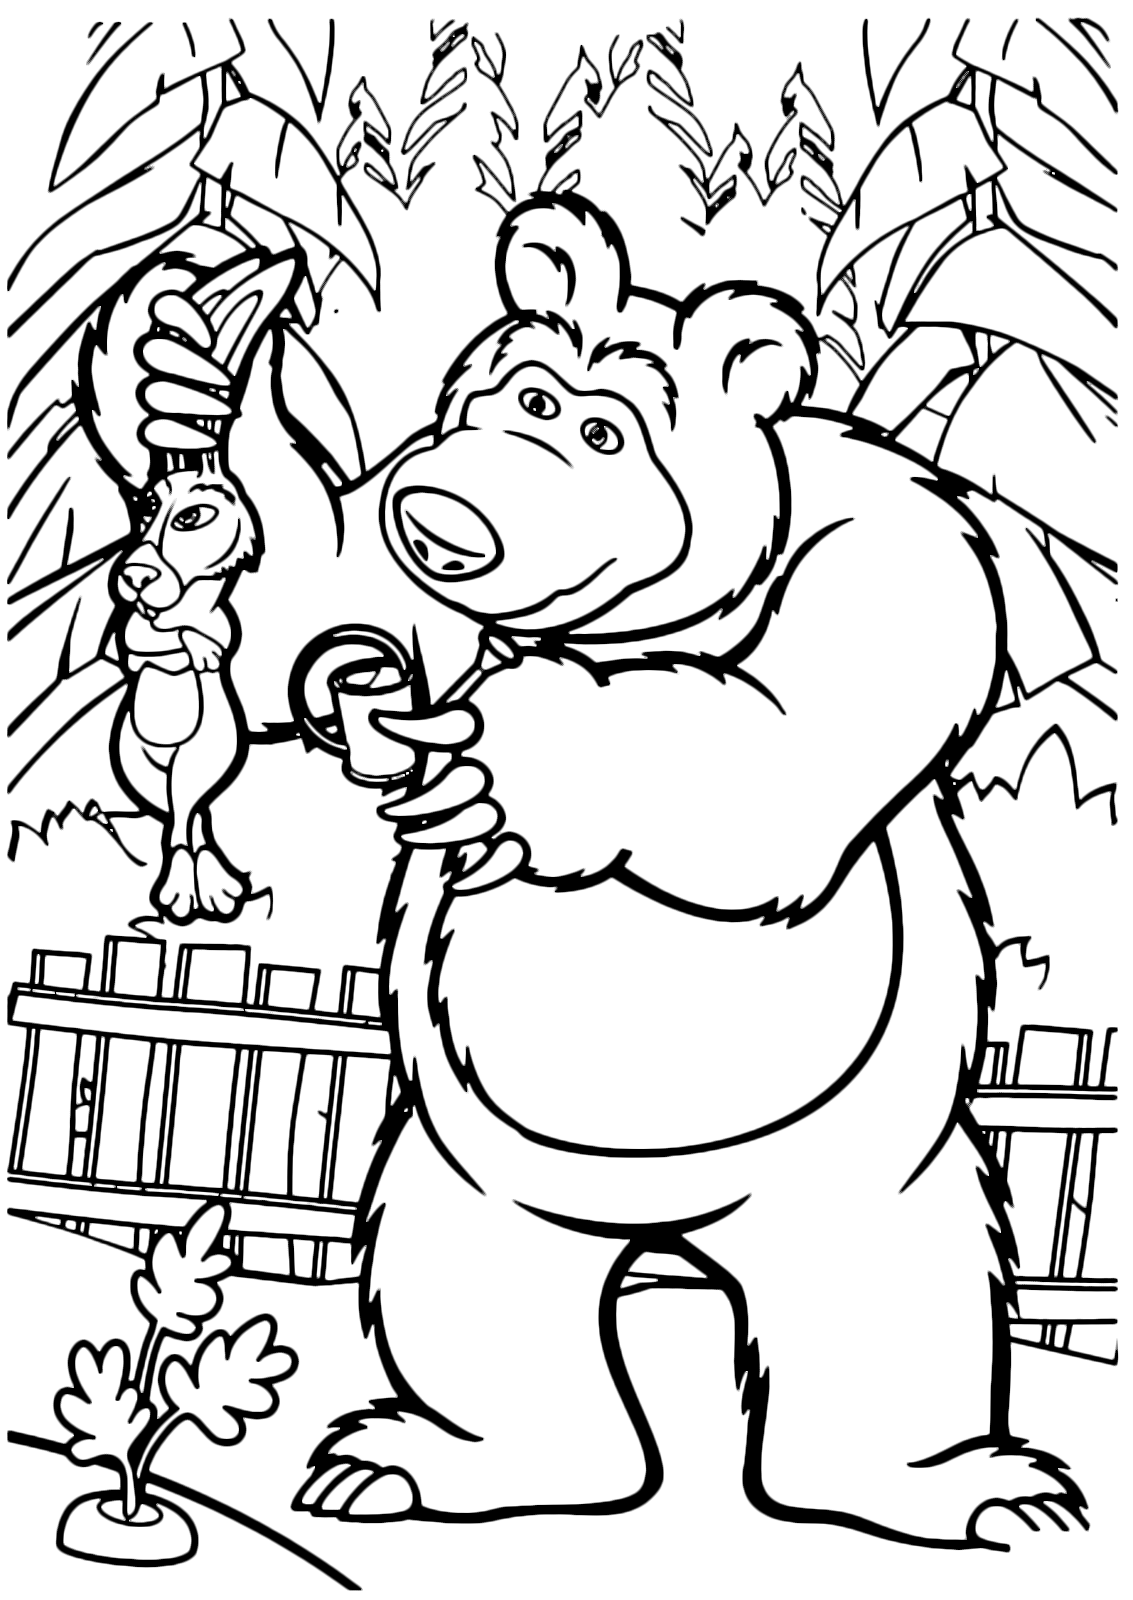 Coloring Pages : The Bear Took Rabbit By Ears Extraordinary ...